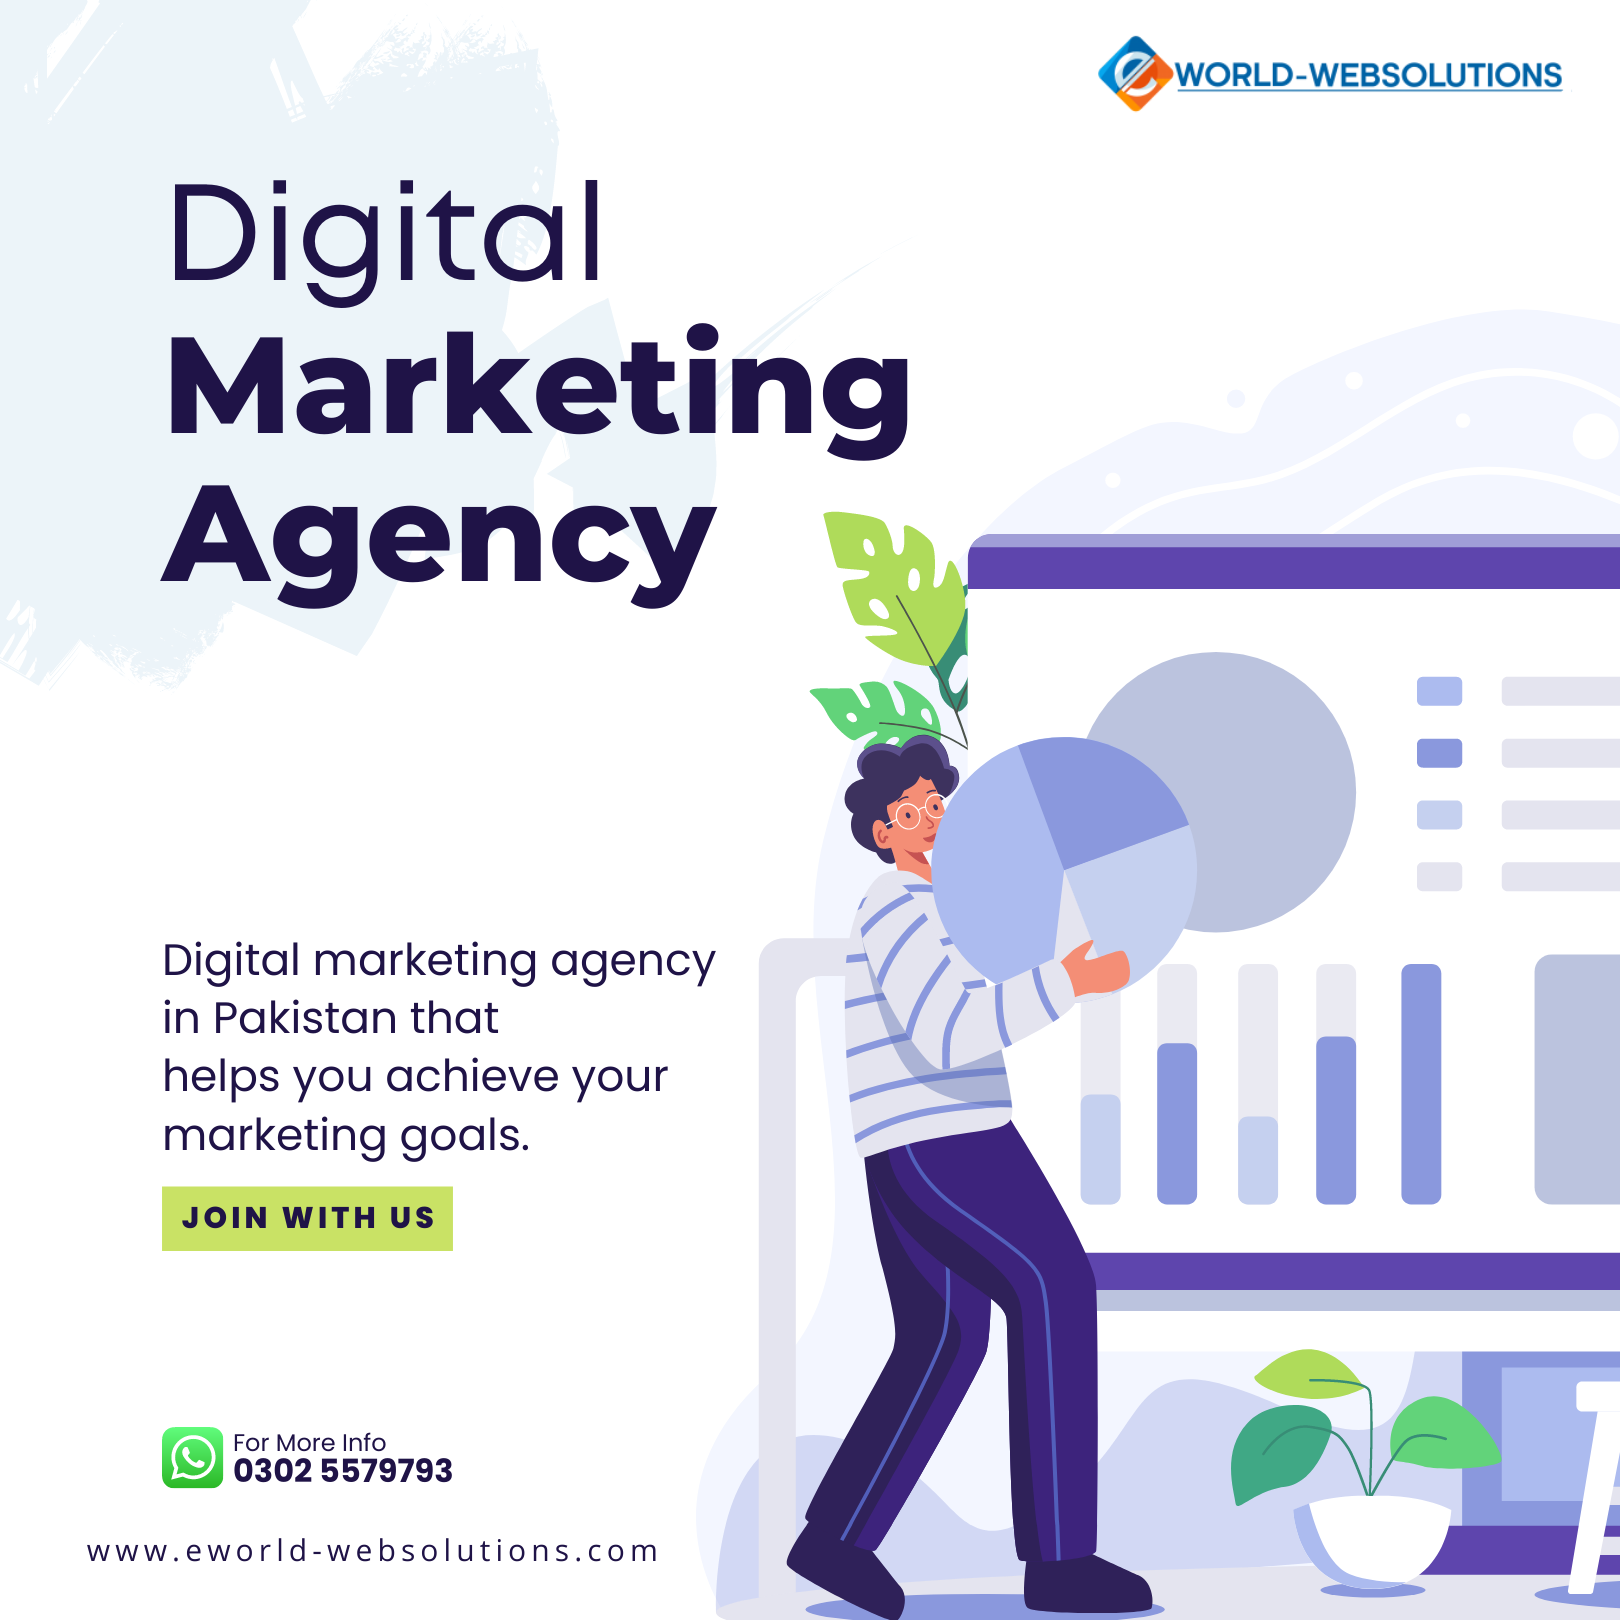 @ woriomessowumons
Digital
Marketing
Agency SE

Digital marketing agency
in Pakistan that \
helps you achieve your —

marketing goals.

JOIN WITH US

For More Info

2) 03025579793

www.eworld-websolutions.com